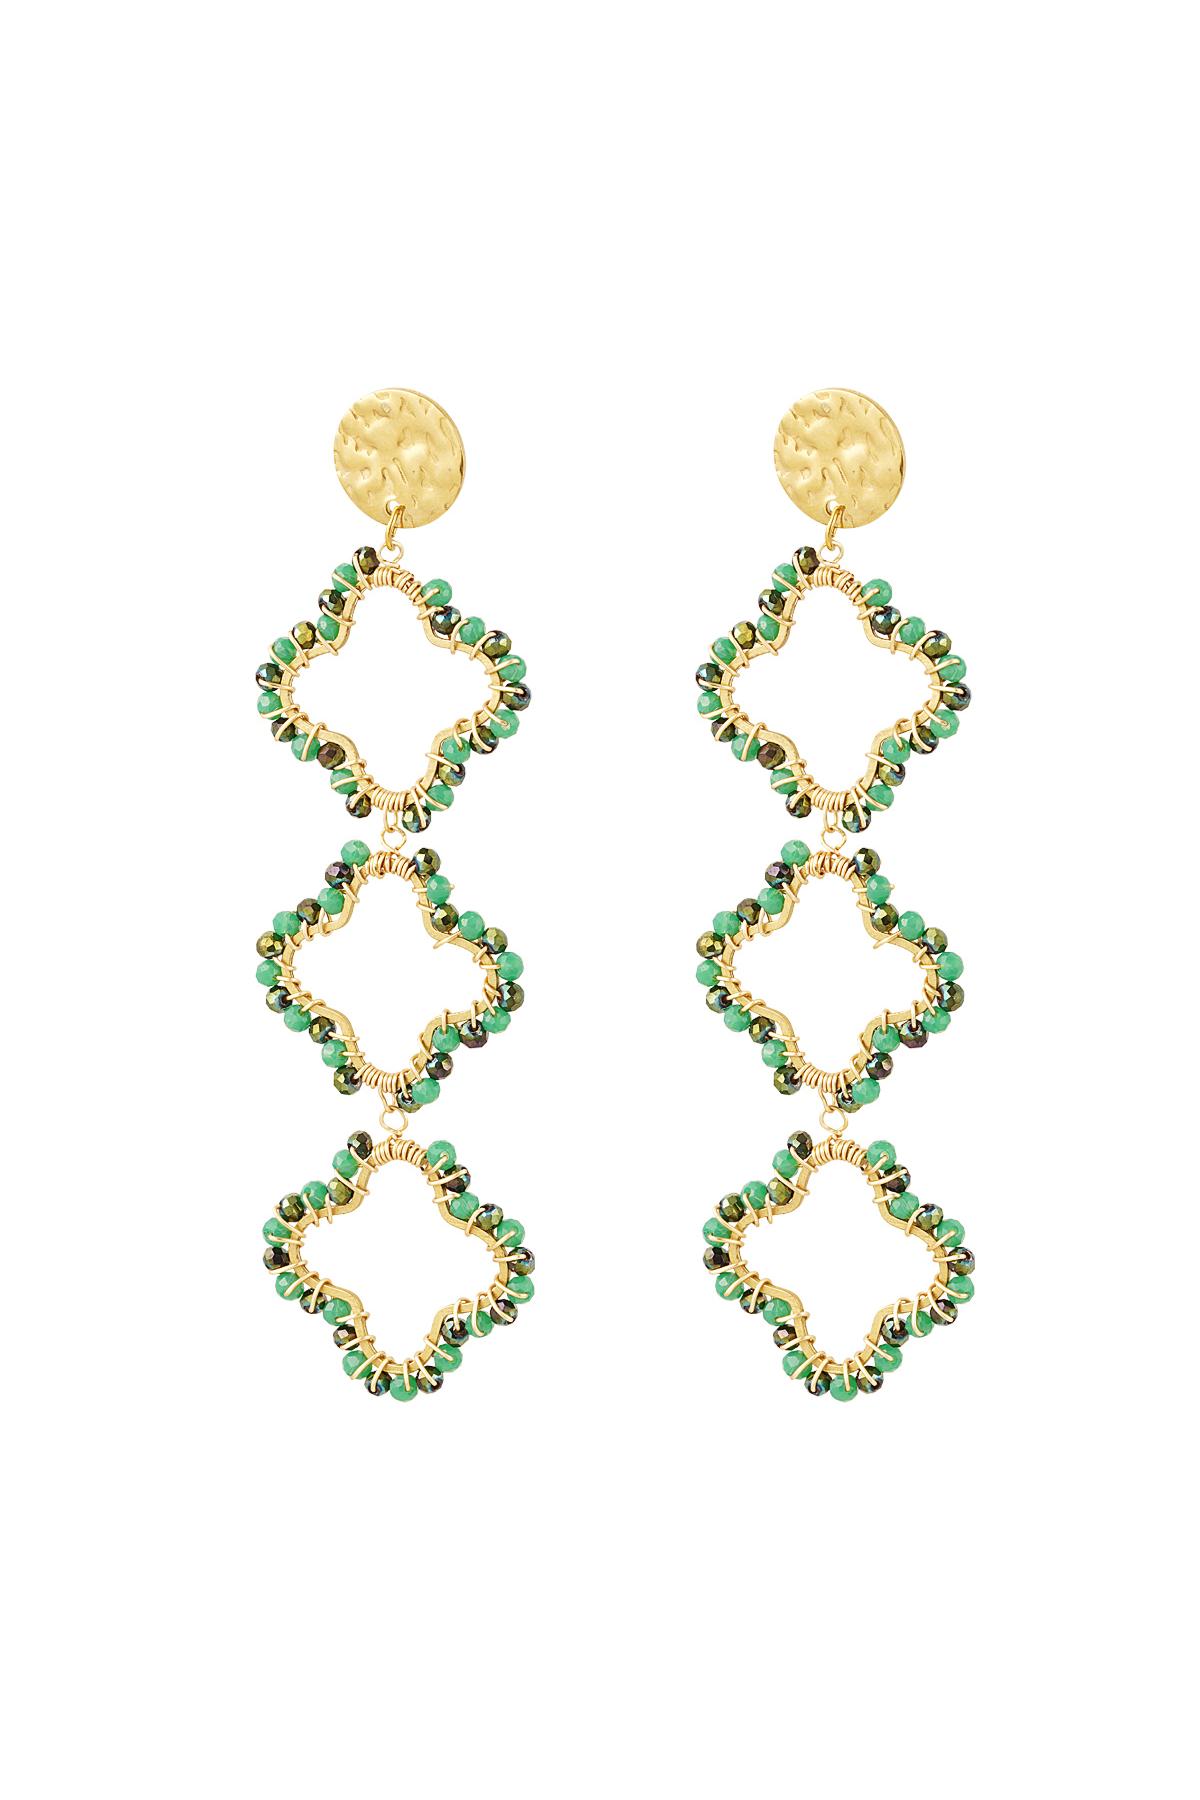 Earrings three clovers with beads Green &amp; Gold Stainless Steel